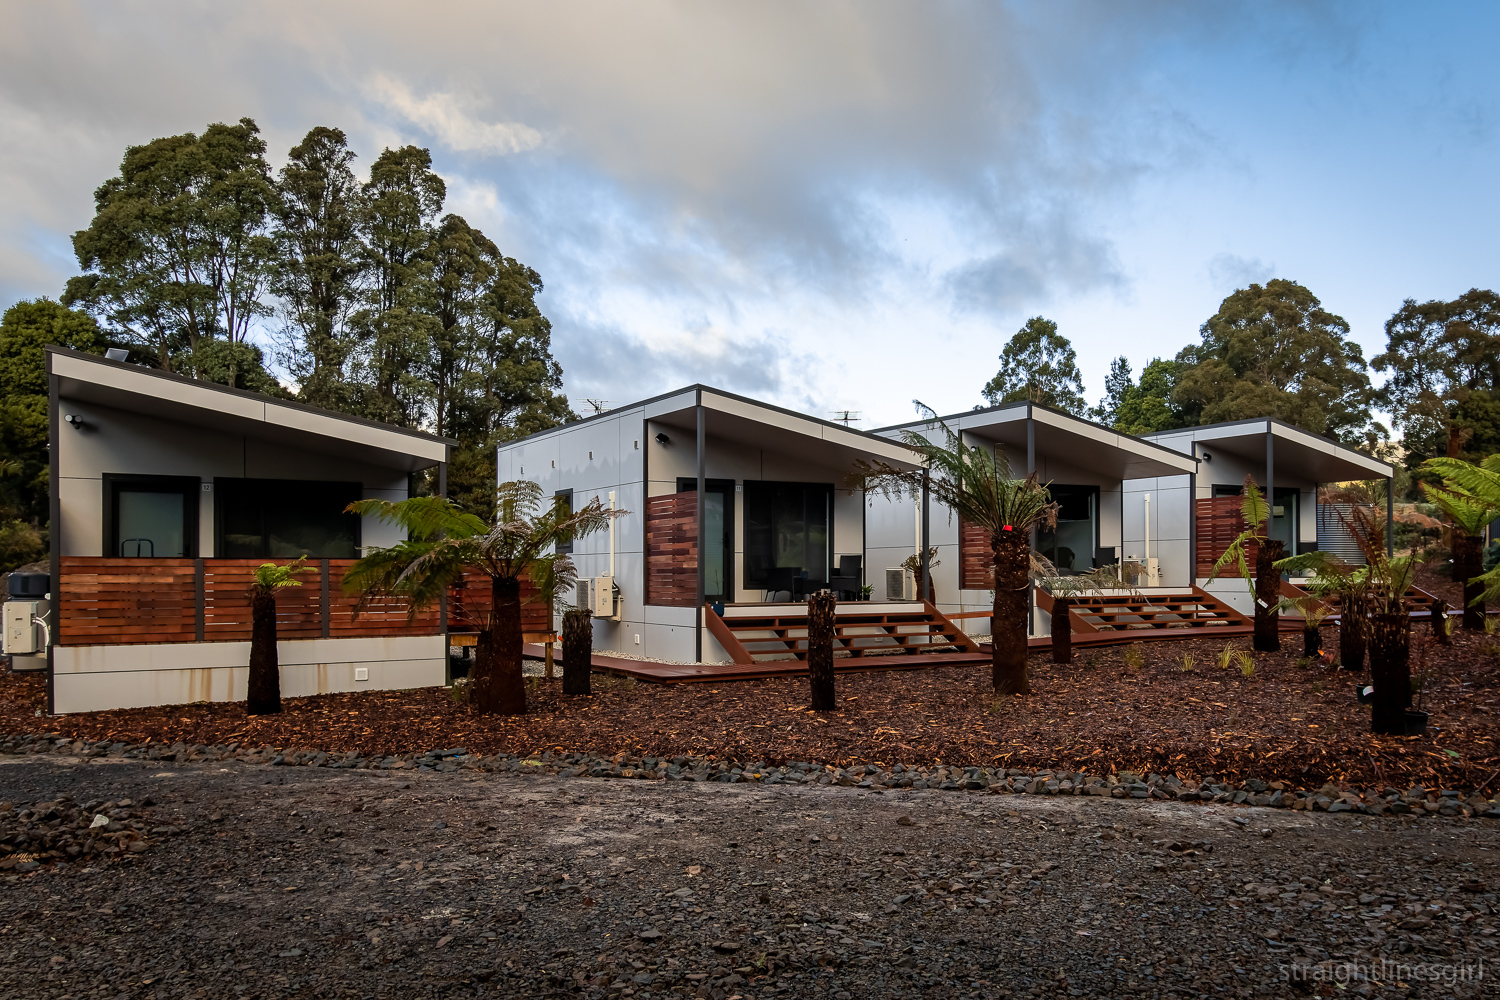 Four small accommodation units in a landscaped area with large ferns